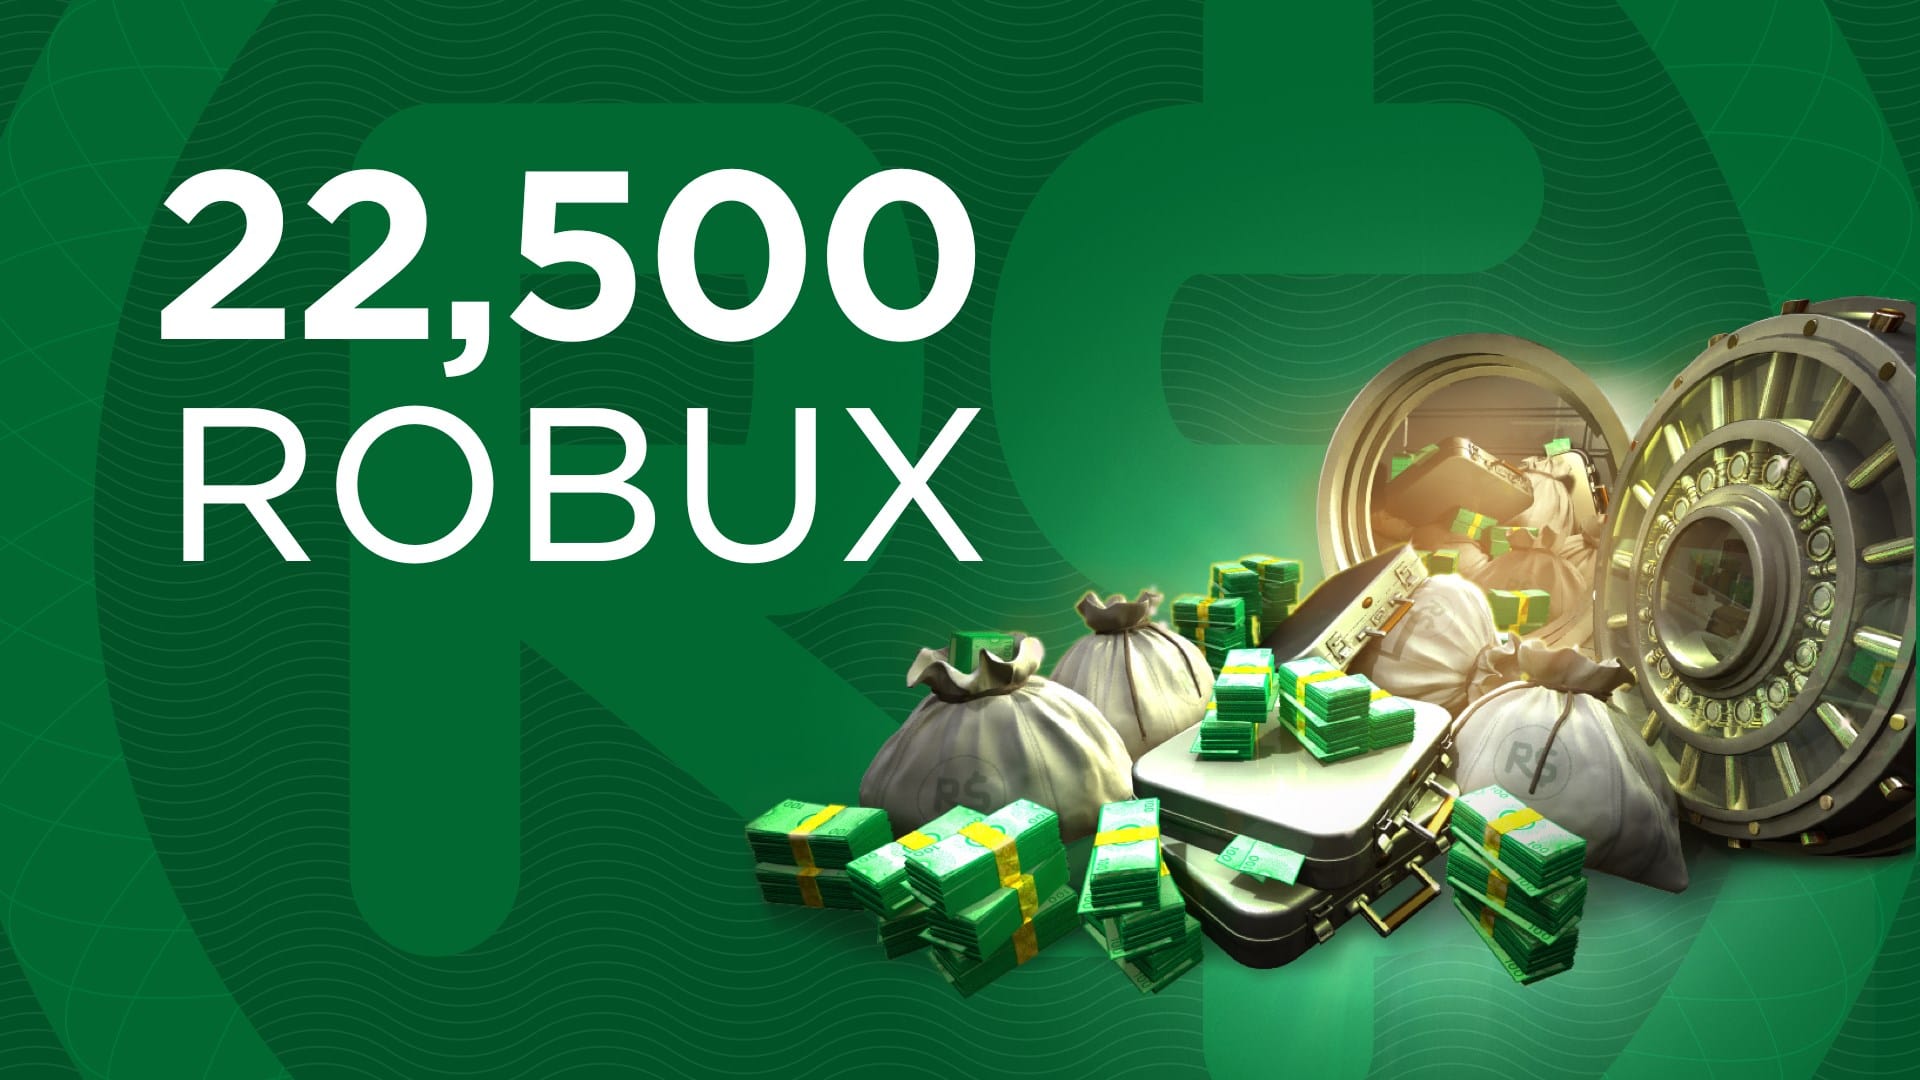 Robux Generator And Legit Ways To Earn Free Robux In 2019 Techolac